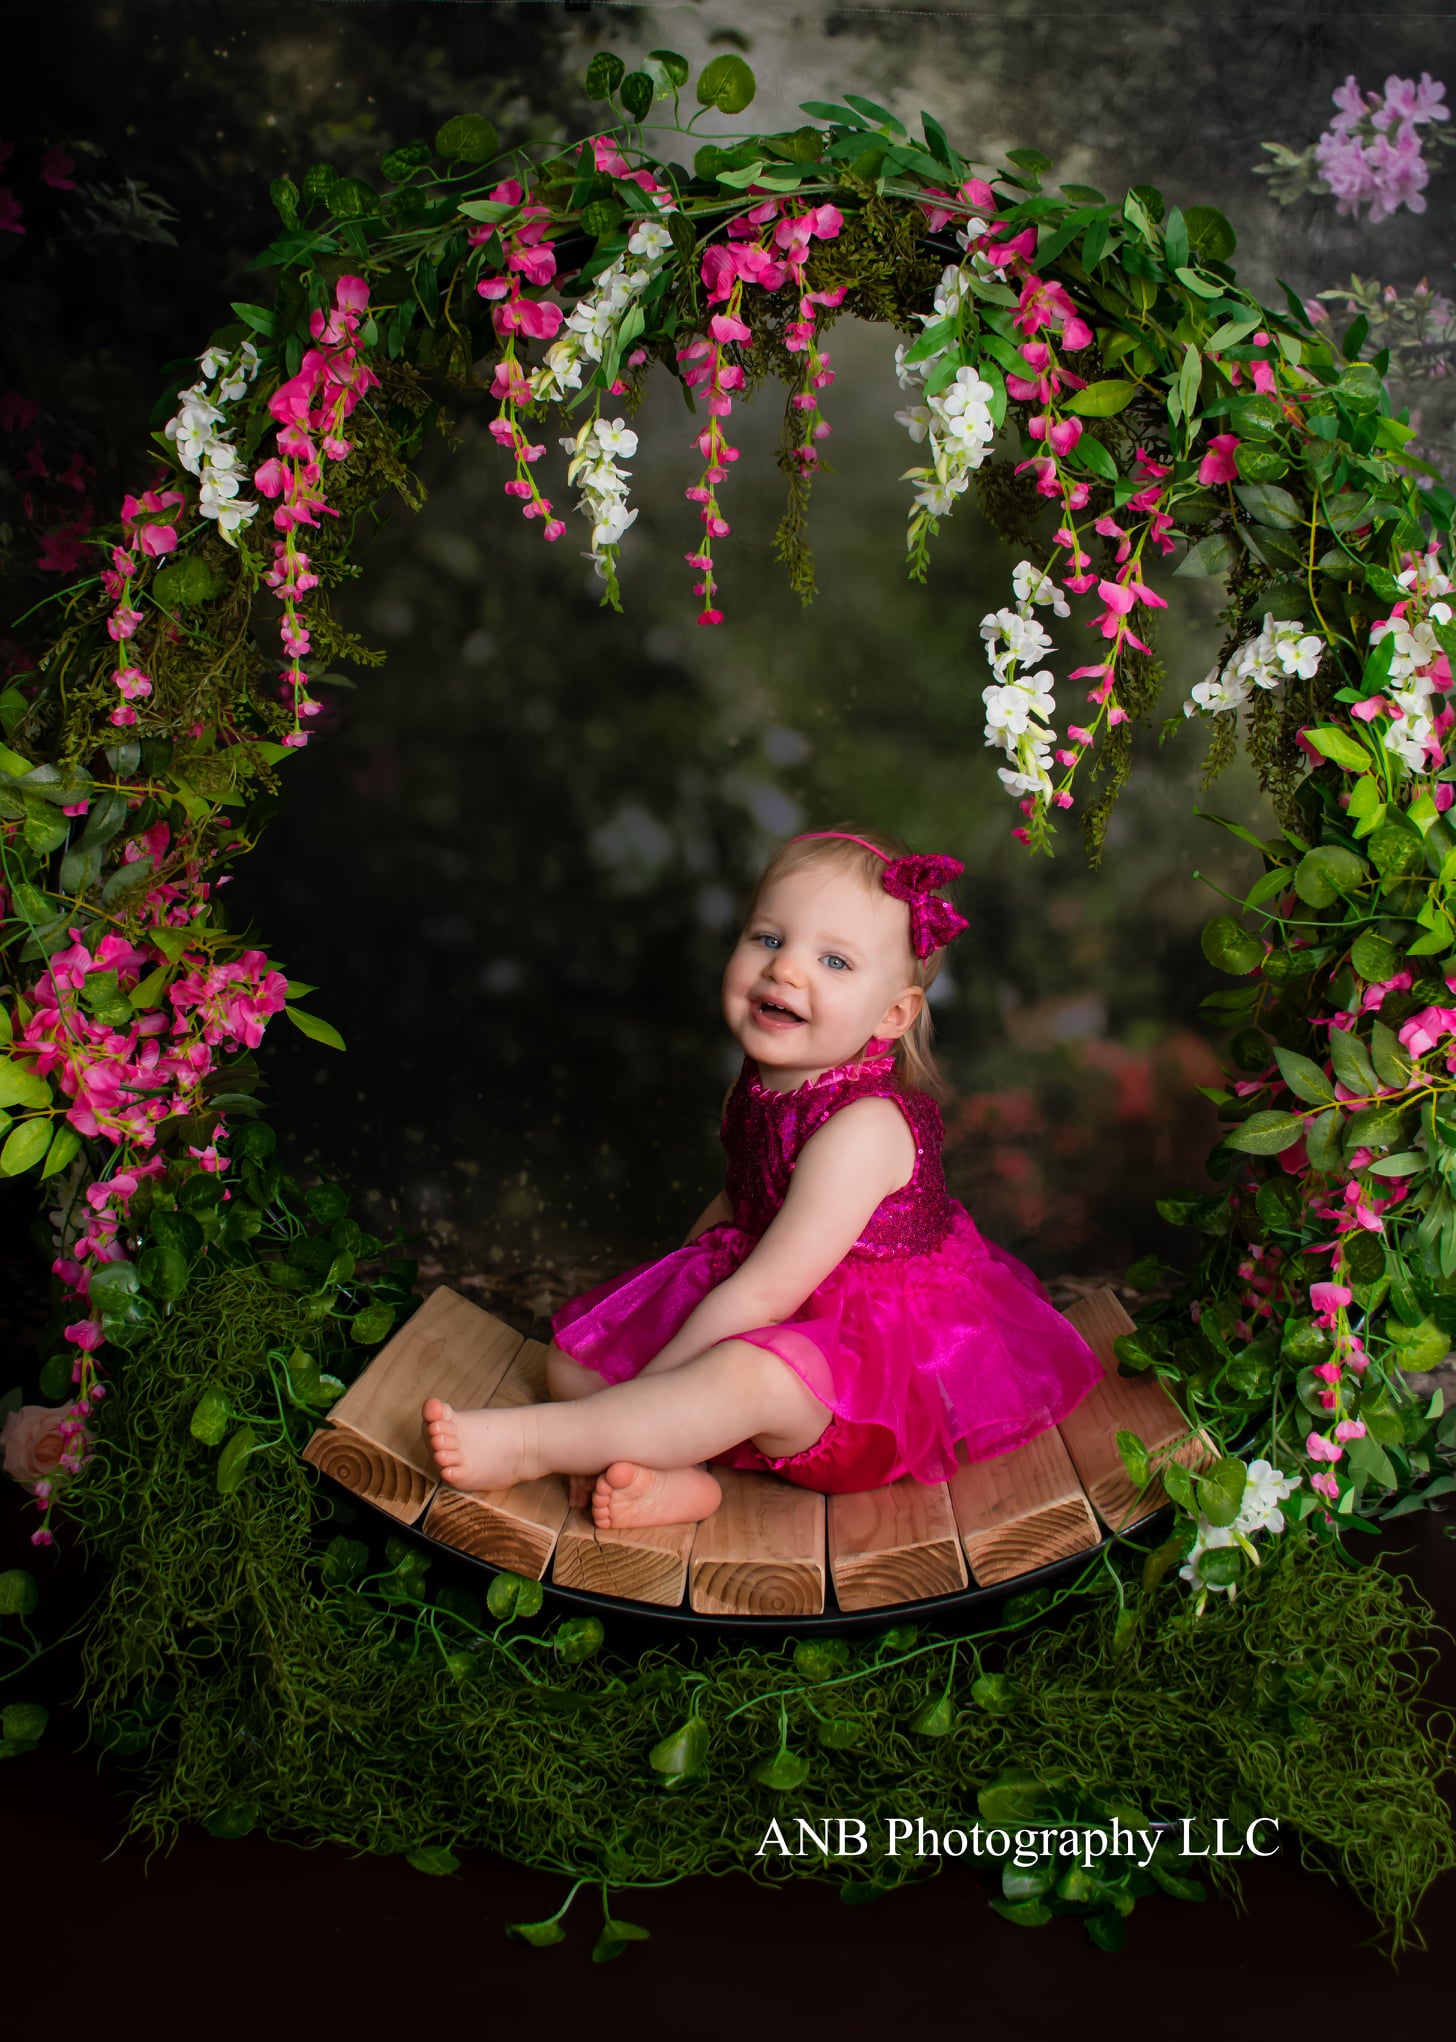 Kate Pink Floral Garden spring Backdrop for Photography Designed by Pine Park Collection